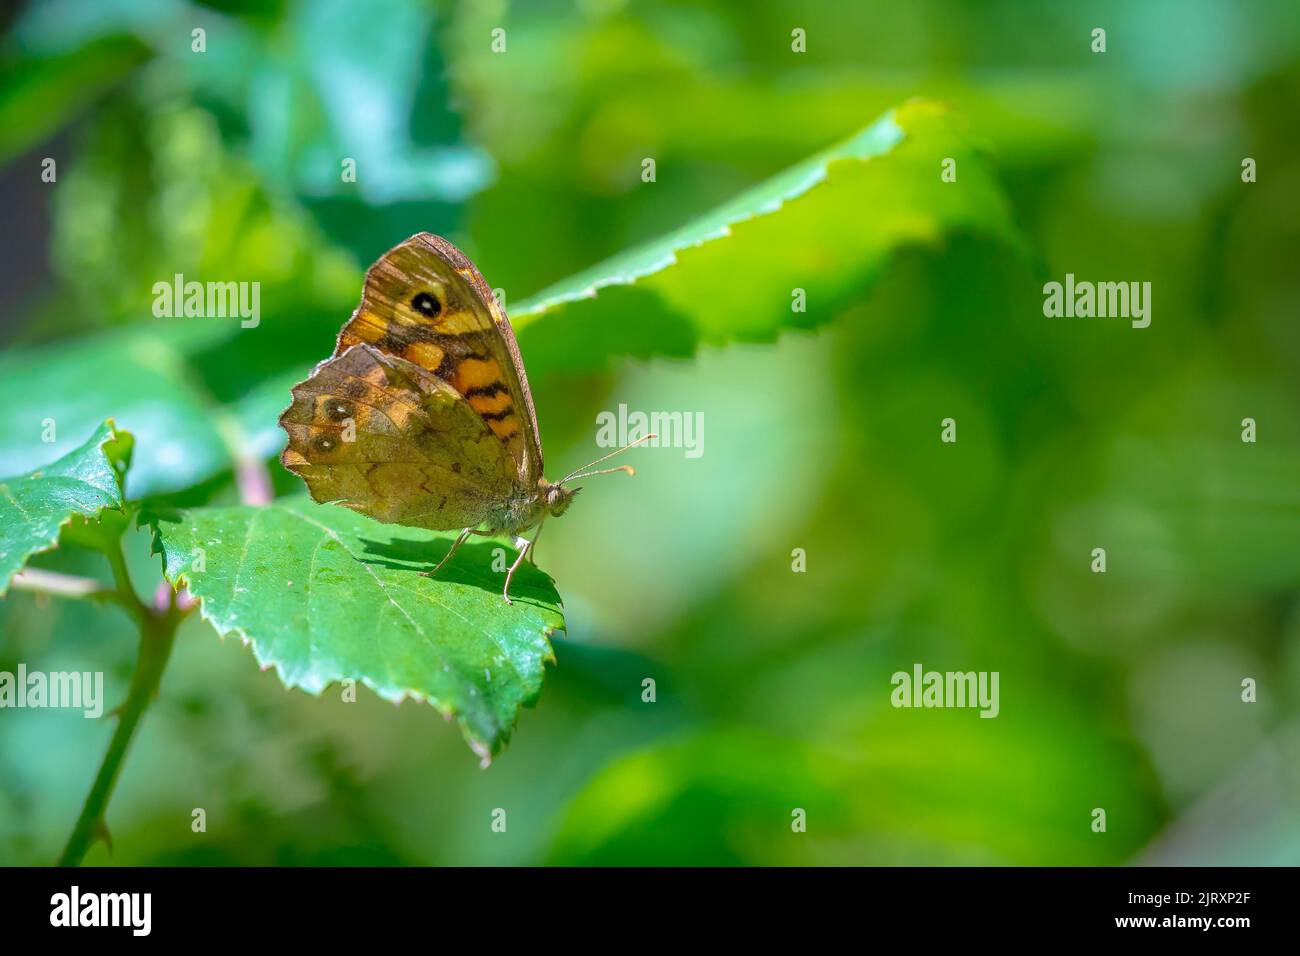 Side view of a speckled wood butterfly, Pararge aegeria. Resting on a leaf in a forest with open wings Stock Photo